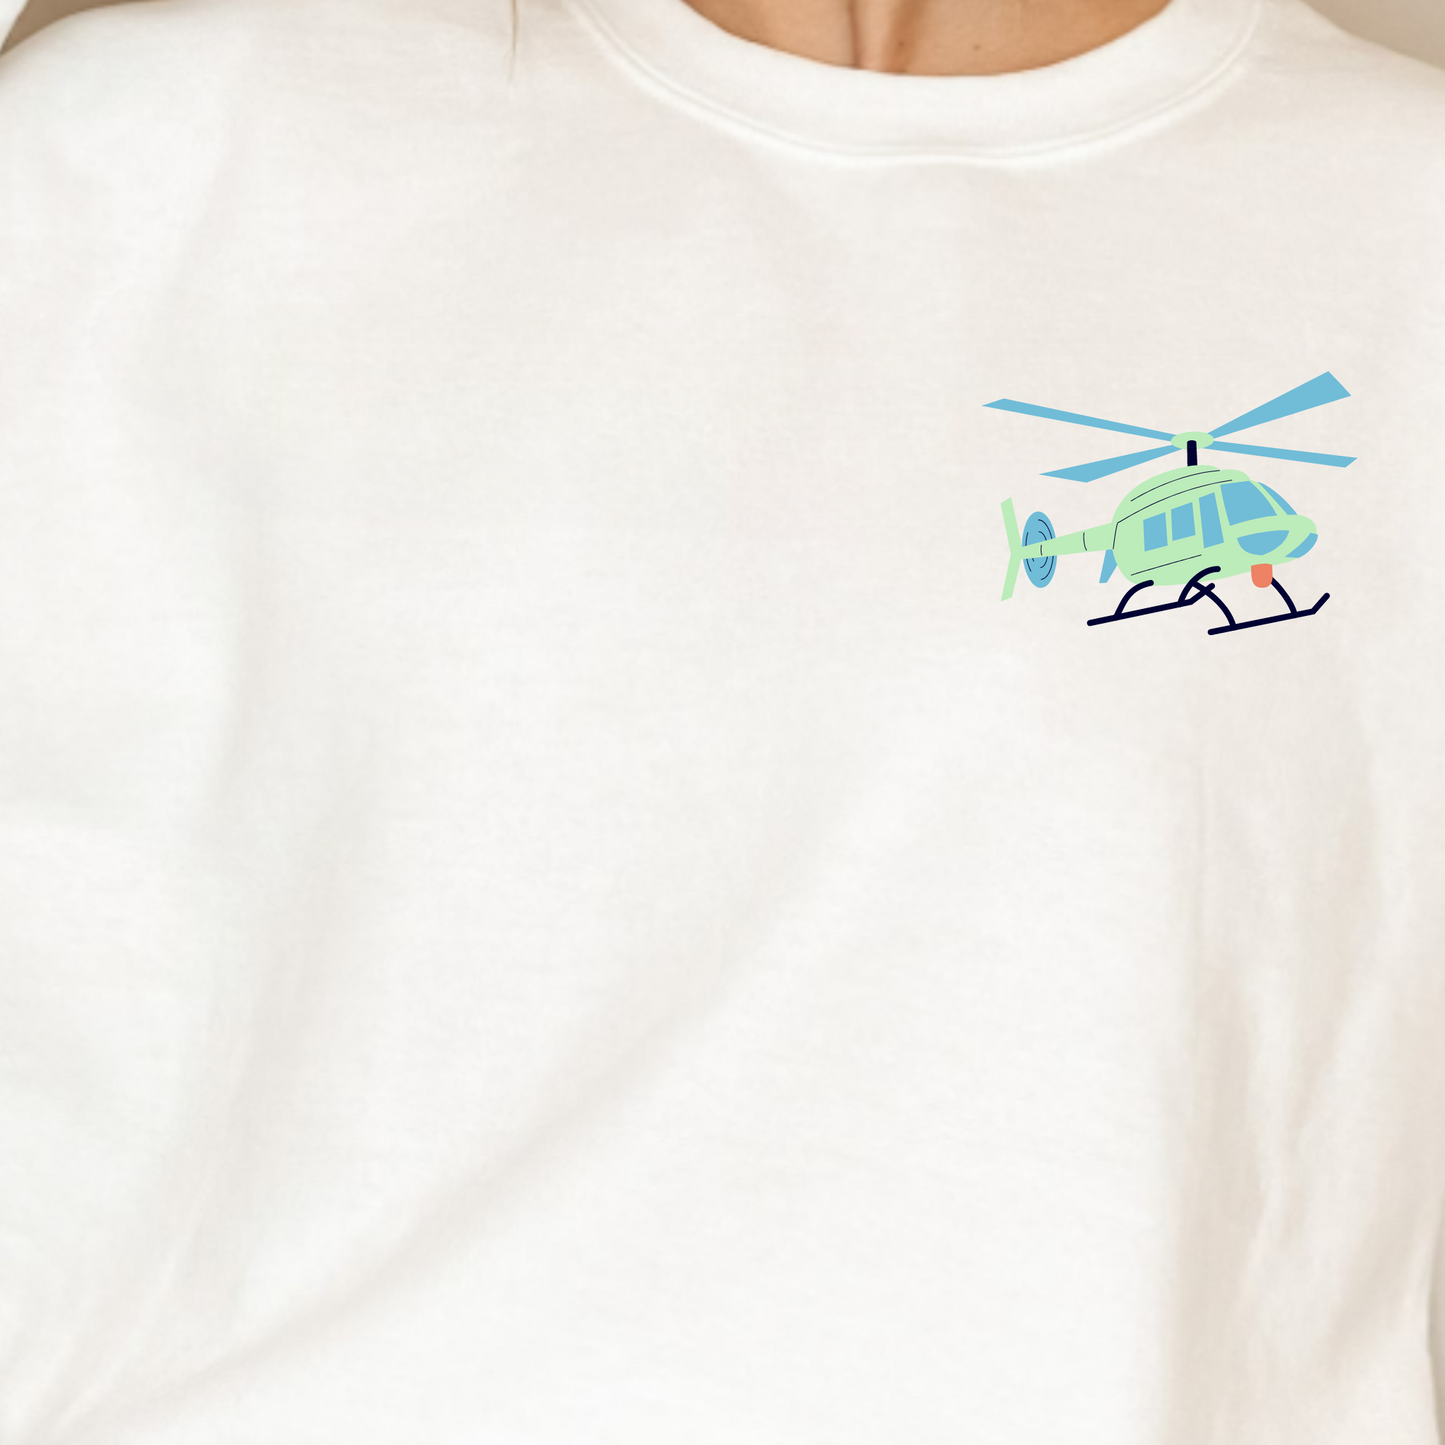 (shirt not included) HELI pocket - Green & Blue -  Clear Film Transfer